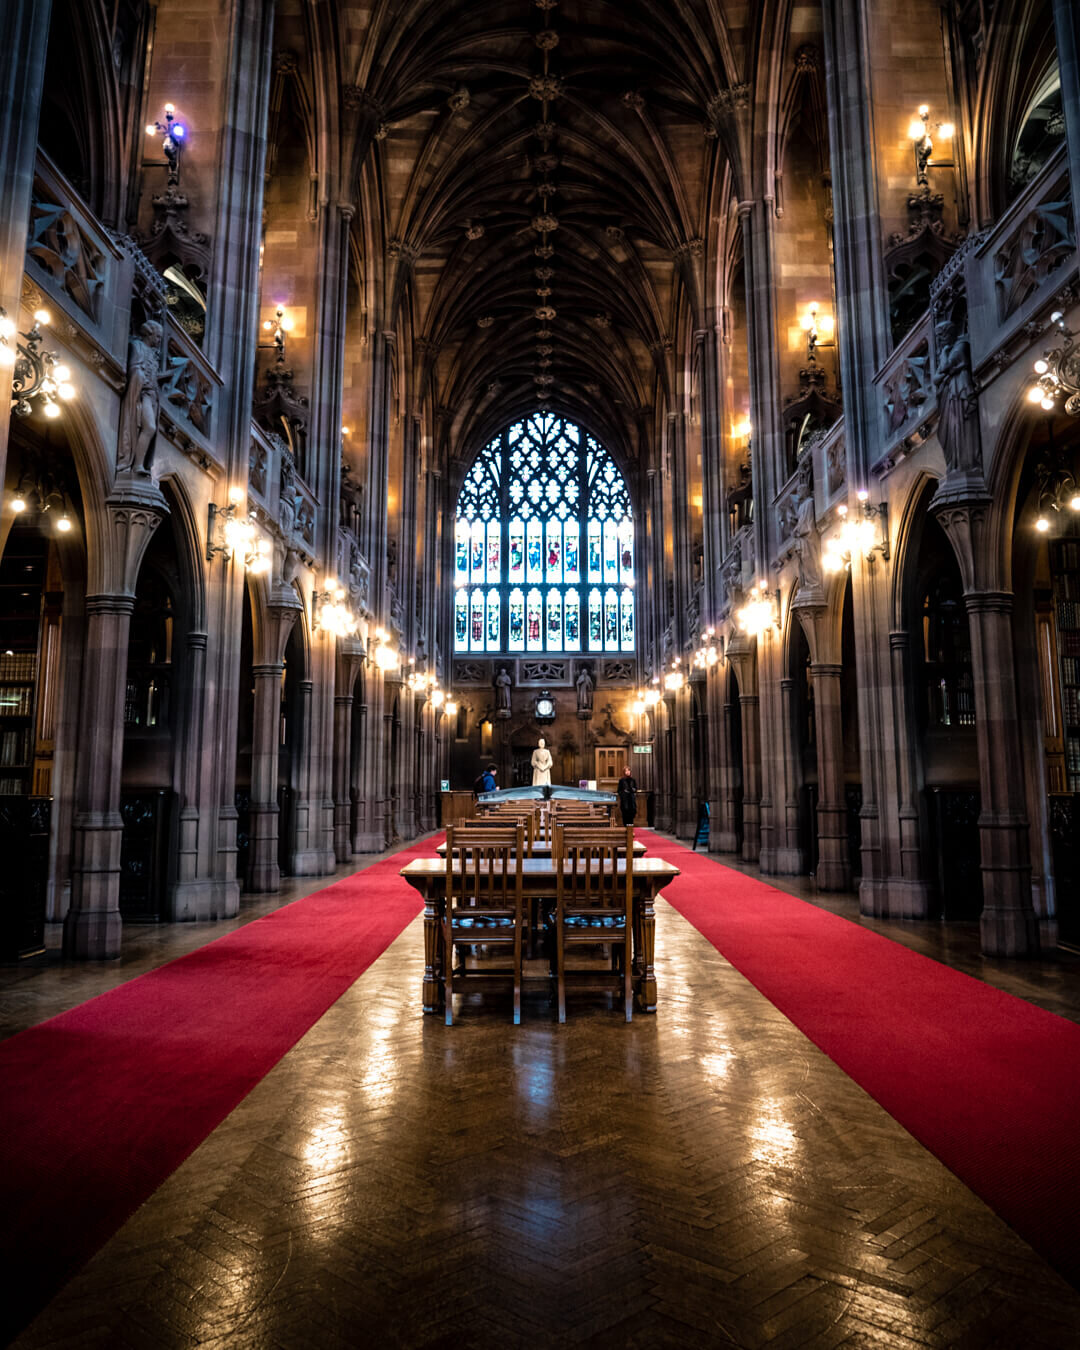 John Rylands a classic neo gothic style library interior